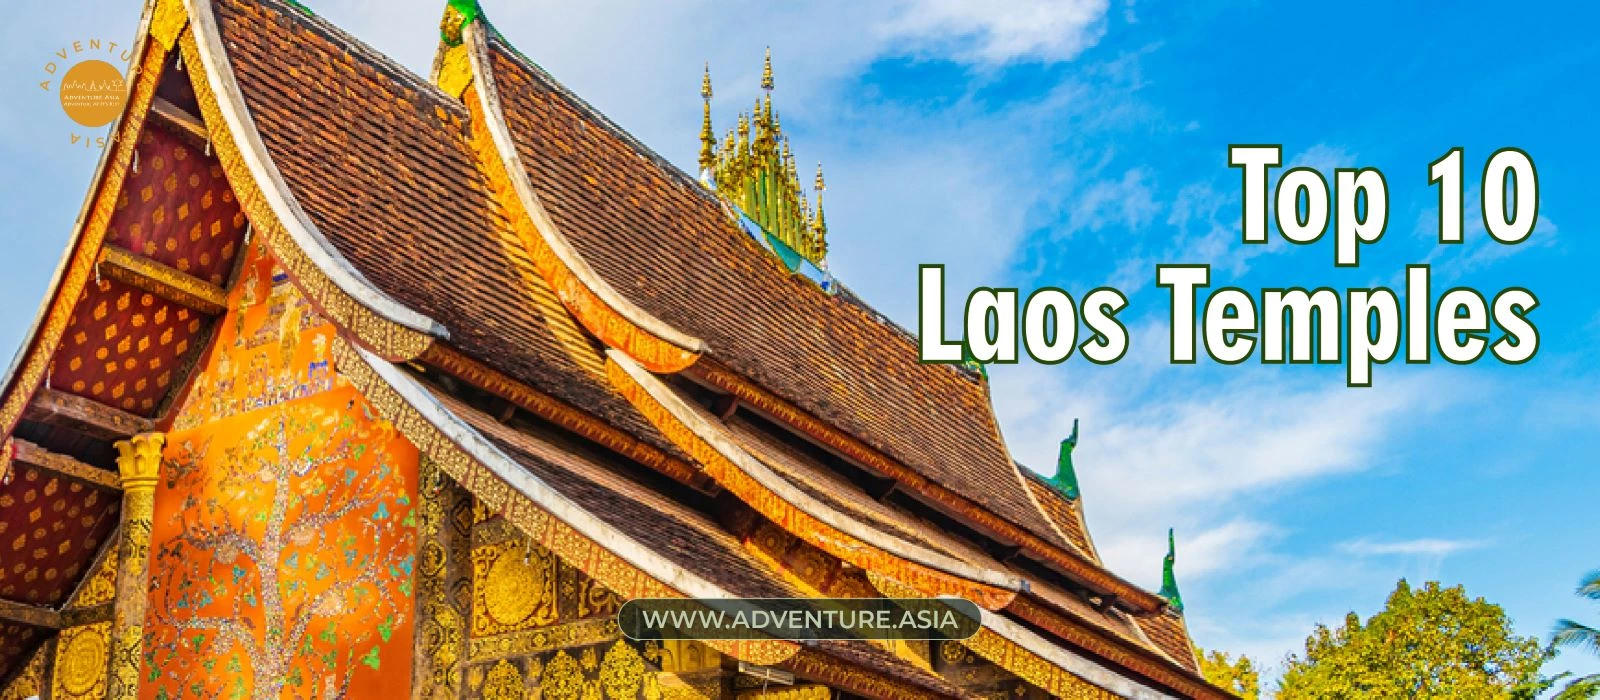 Top 10 Laos temples that you simply have to see